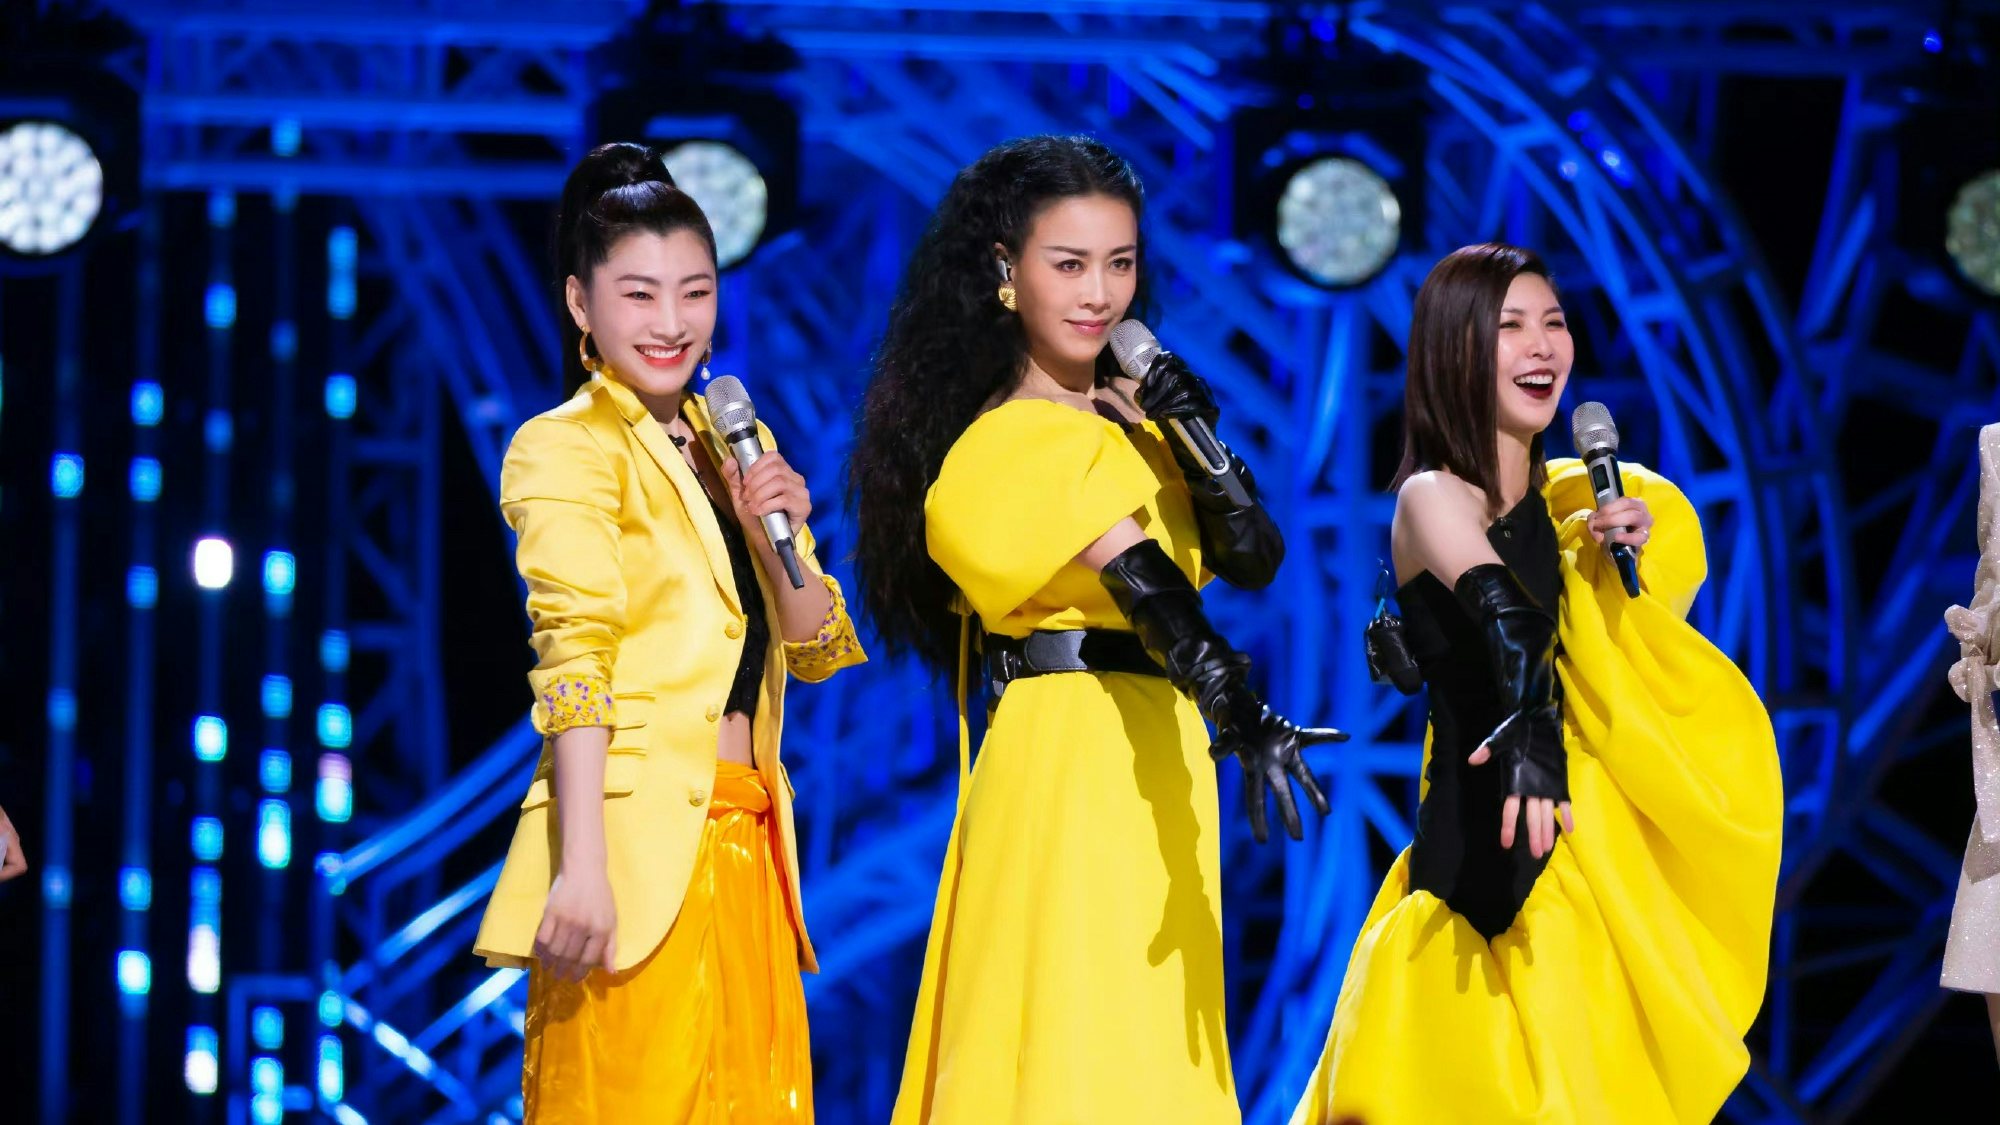 The third season of the variety show, "Sisters Who Make Waves," is taking China’s internet by storm. How can luxury brands ride on its popularity? Photo: Sisters Who Make Waves' Weibo